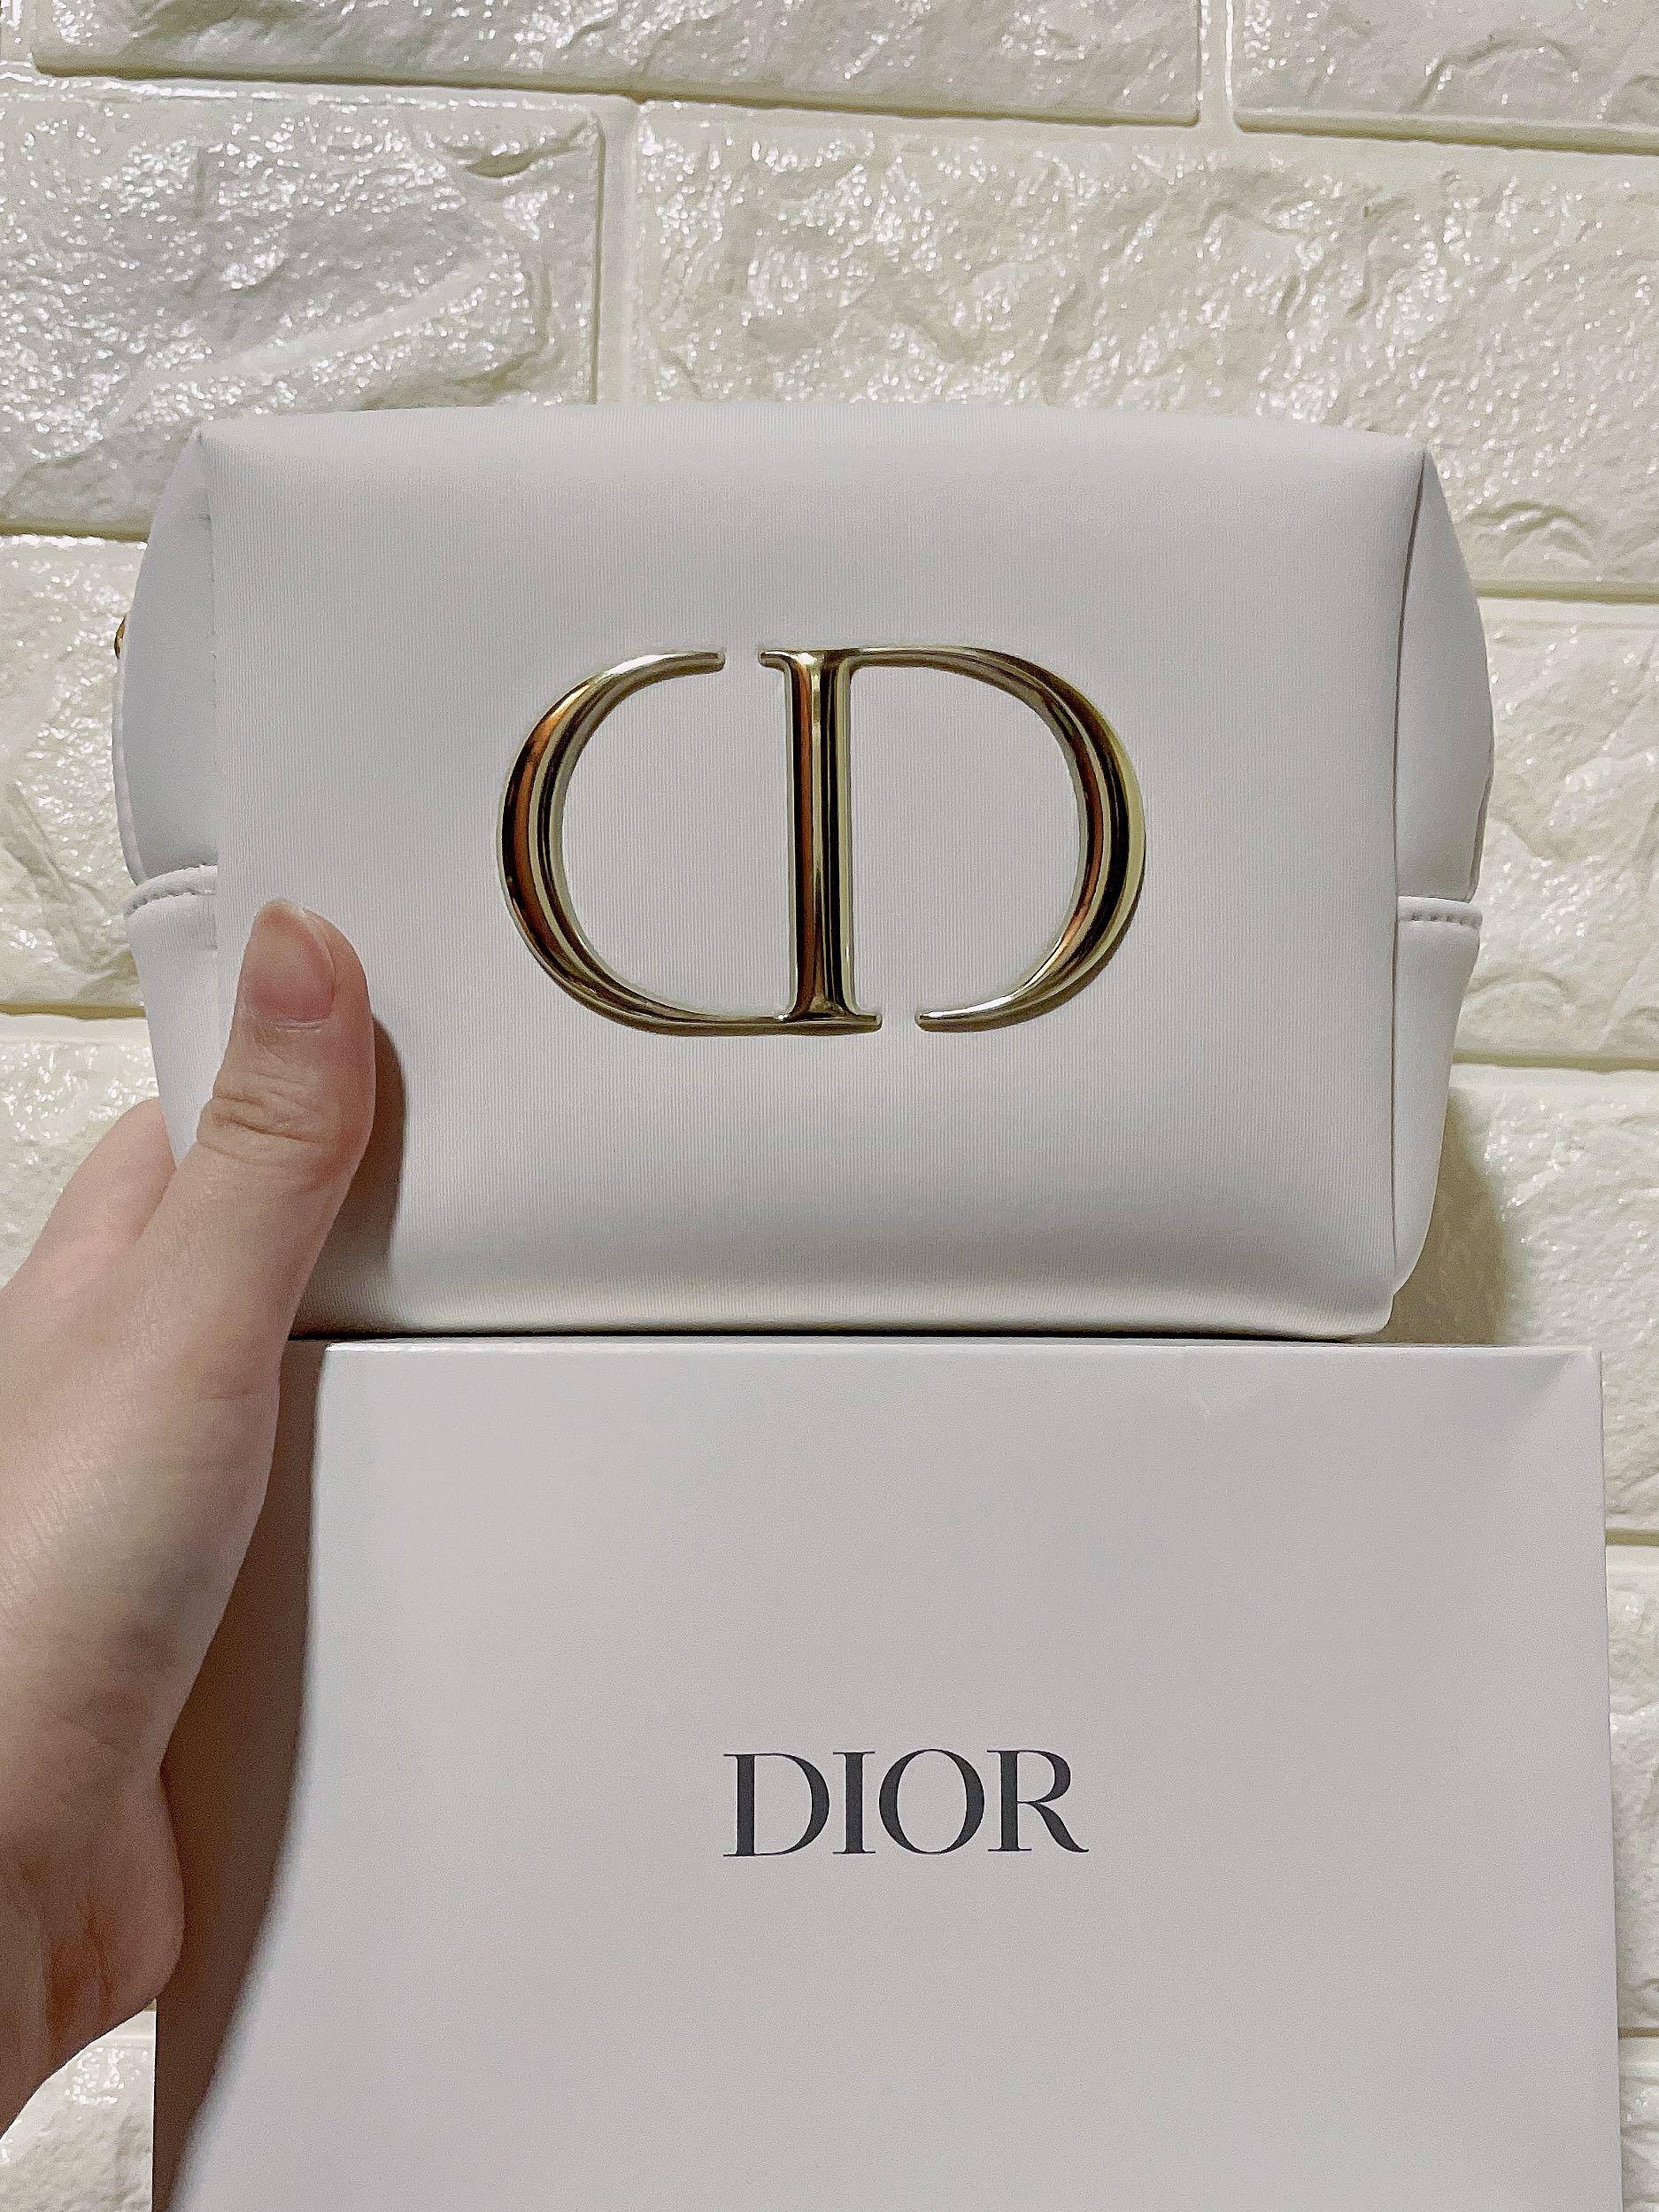 DIOR BEAUTY BAG COLLECTION | Christian Dior Makeup Cosmetic Pouch Trousse  SUNGLASSES UNBOXING #dior - YouTube